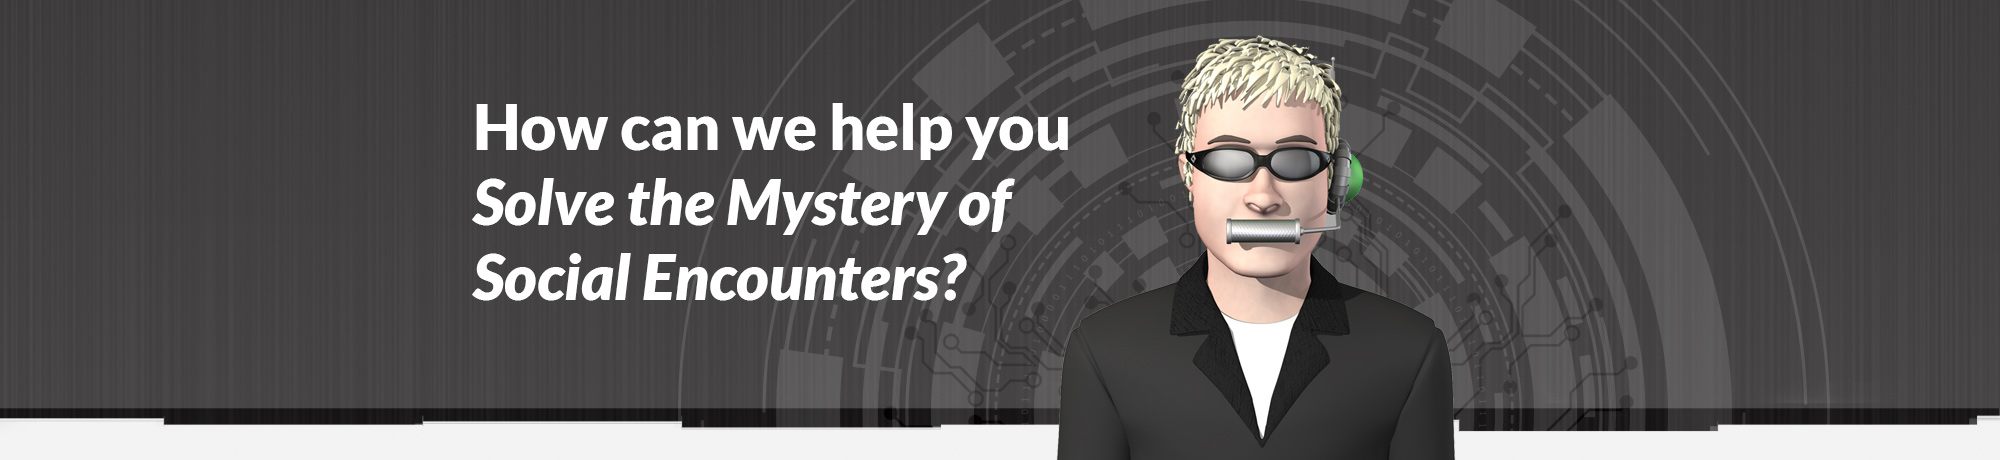 How can we help you Solve the Mystery of Social Encounters